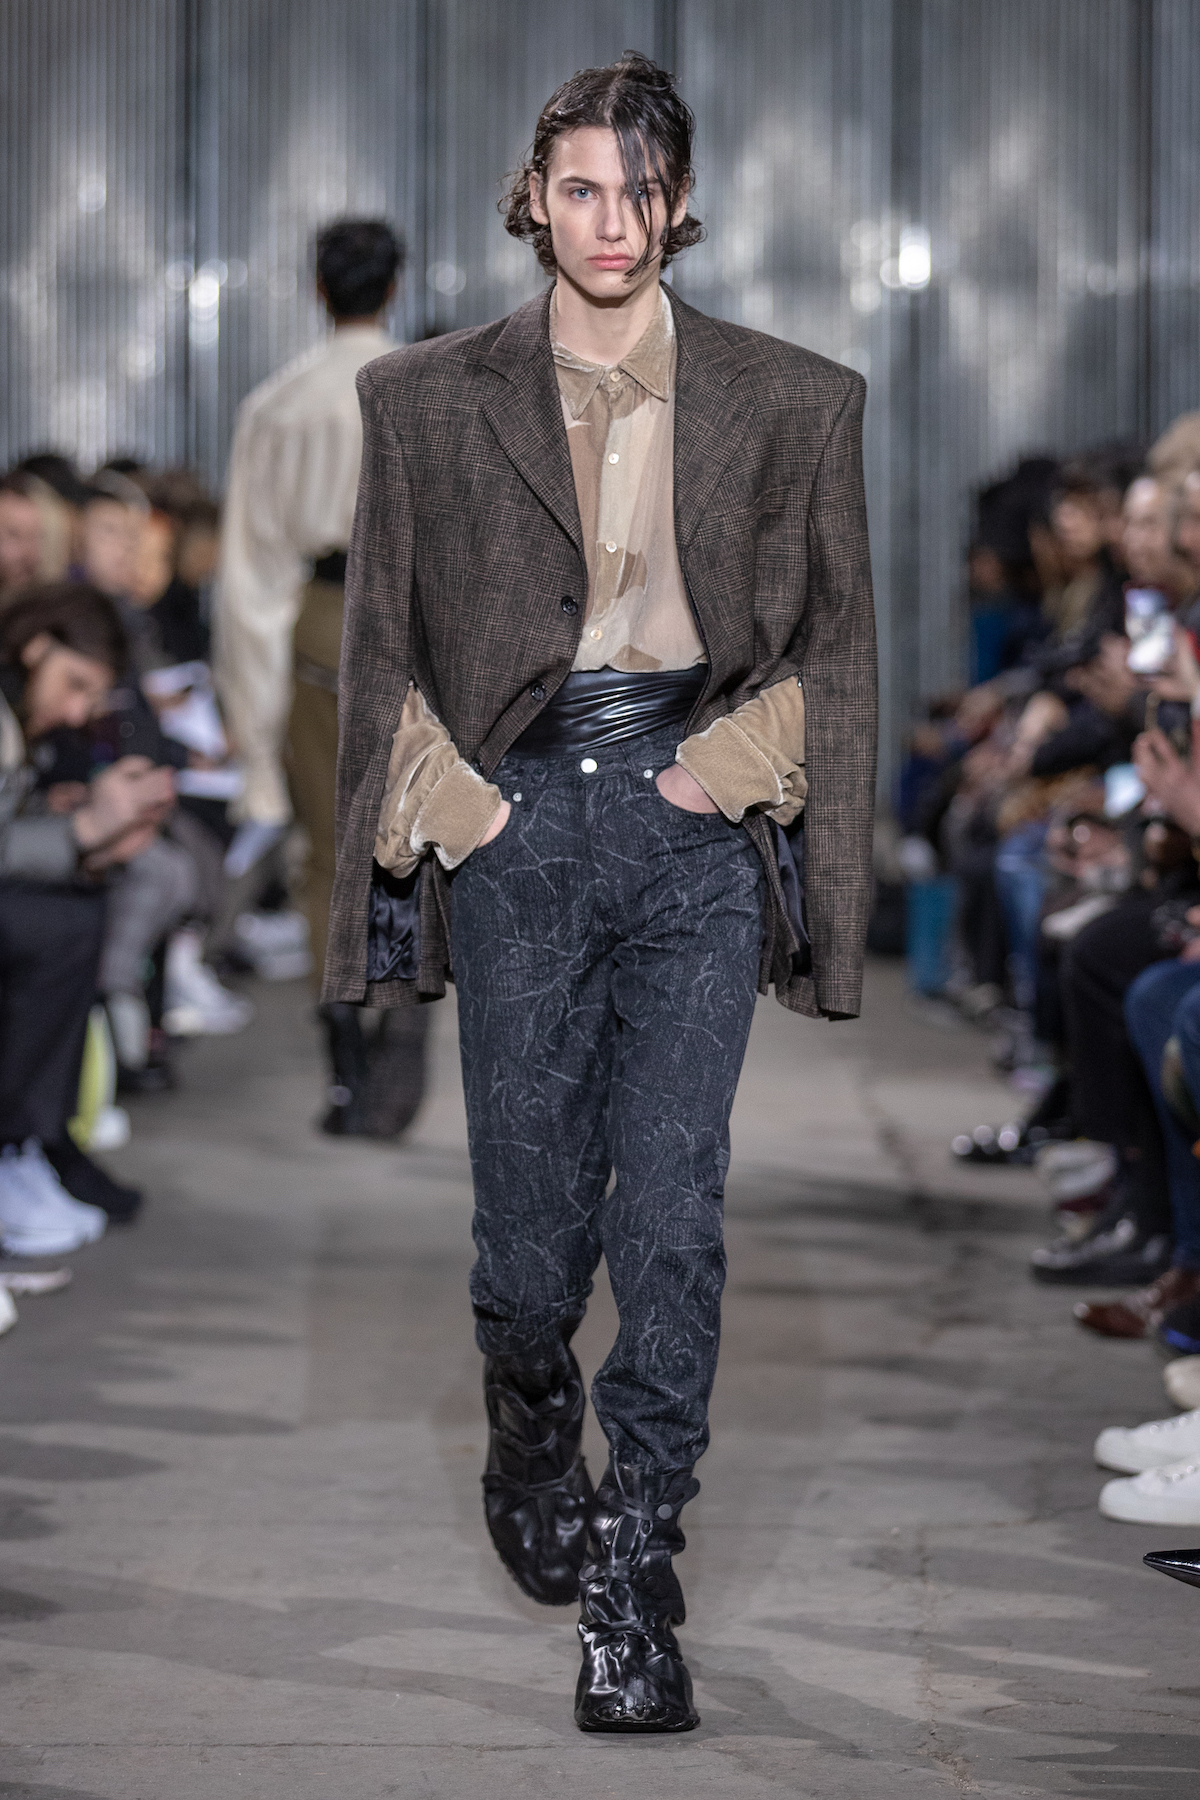 PFW: CMMN SWDN Autumn/Winter 2019 Collection